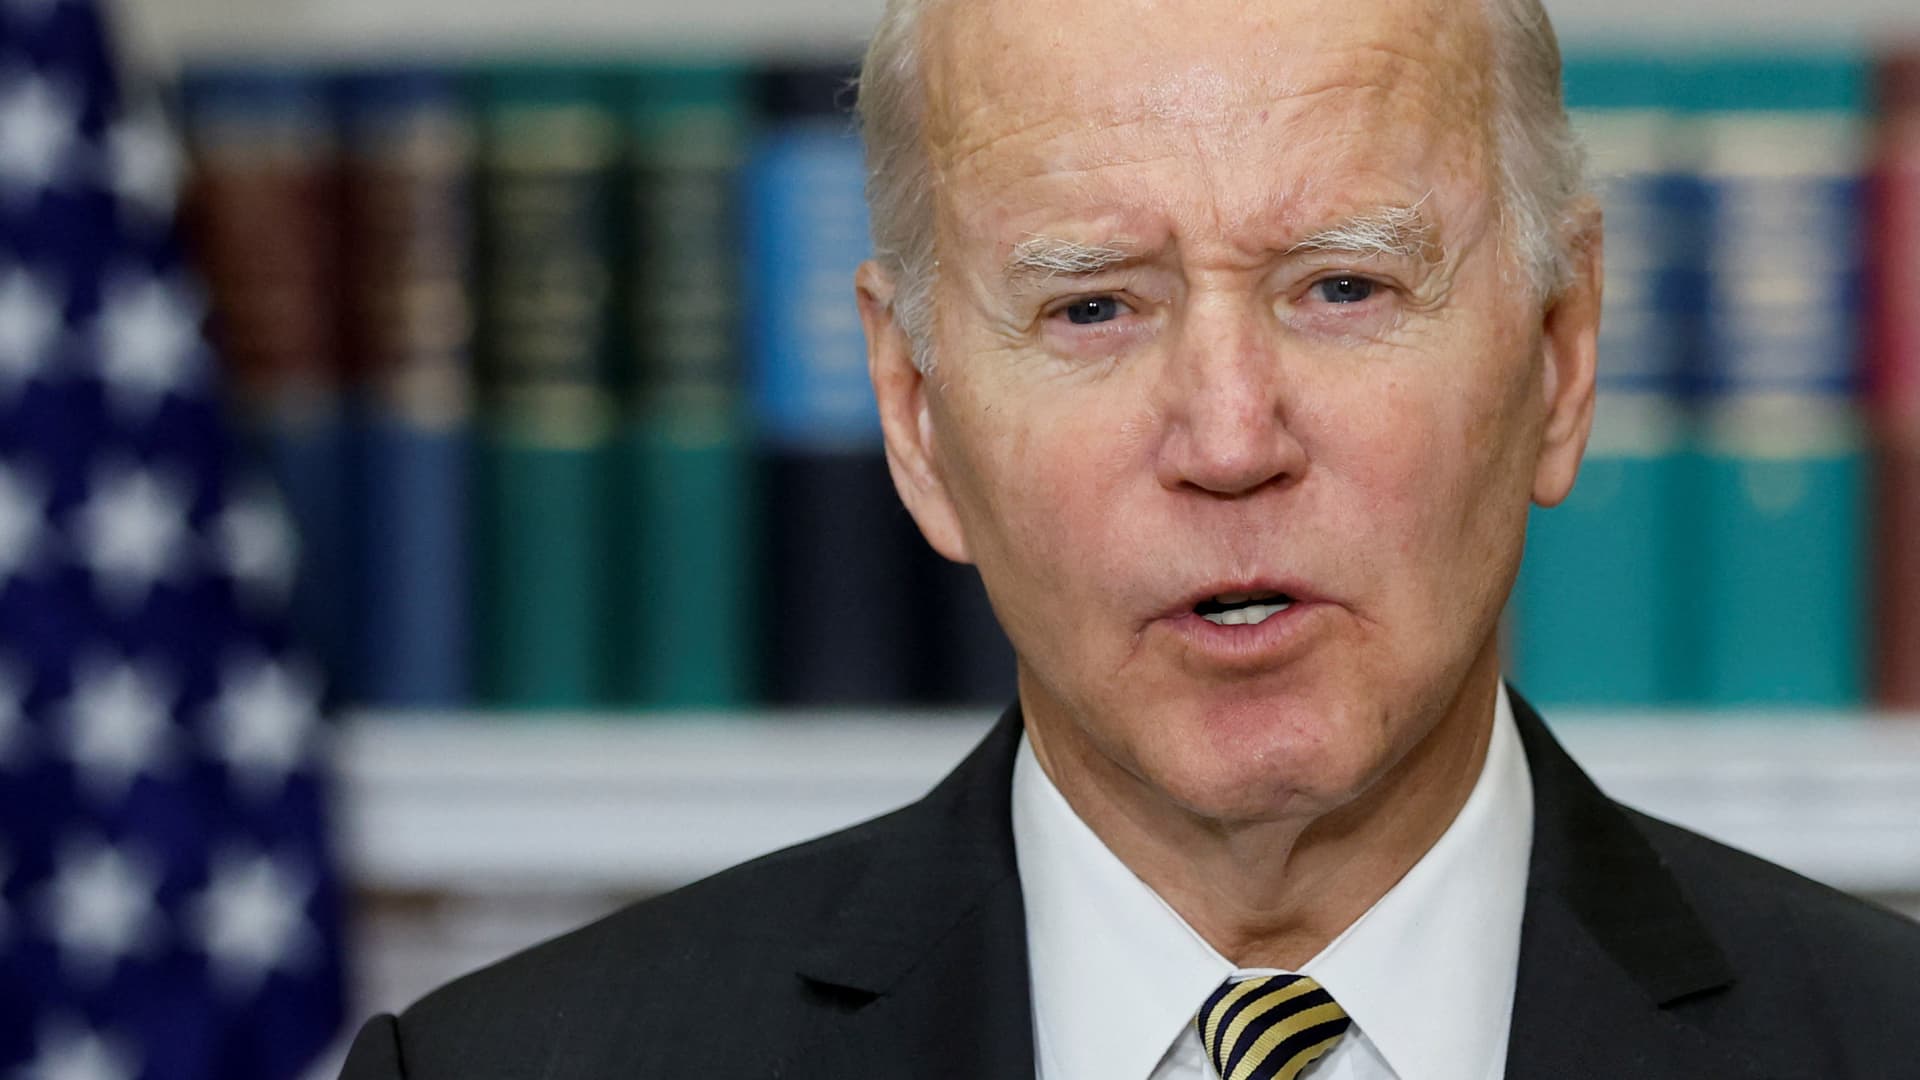 Biden says oil companies should ramp up production and cut prices at the pump instead of buying back stock, paying dividends